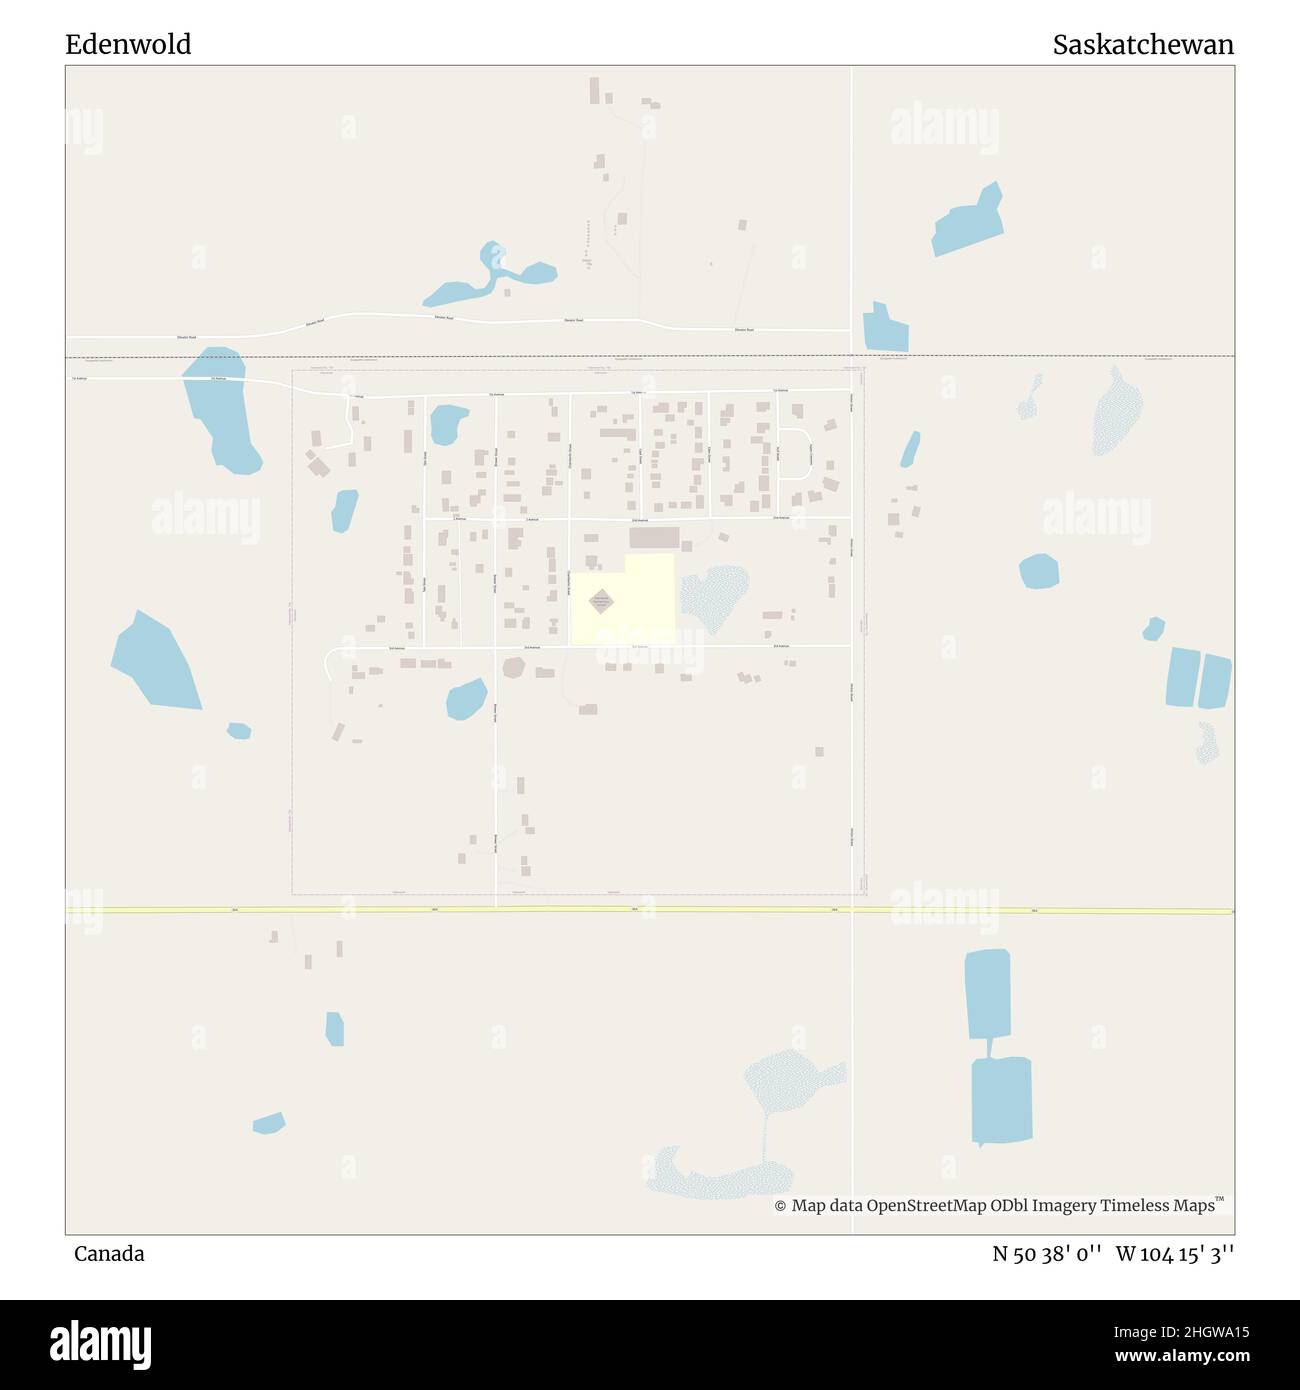 Edenwold, Canada, Saskatchewan, N 50 38' 0'', W 104 15' 3'', map, Timeless Map published in 2021. Travelers, explorers and adventurers like Florence Nightingale, David Livingstone, Ernest Shackleton, Lewis and Clark and Sherlock Holmes relied on maps to plan travels to the world's most remote corners, Timeless Maps is mapping most locations on the globe, showing the achievement of great dreams Stock Photo